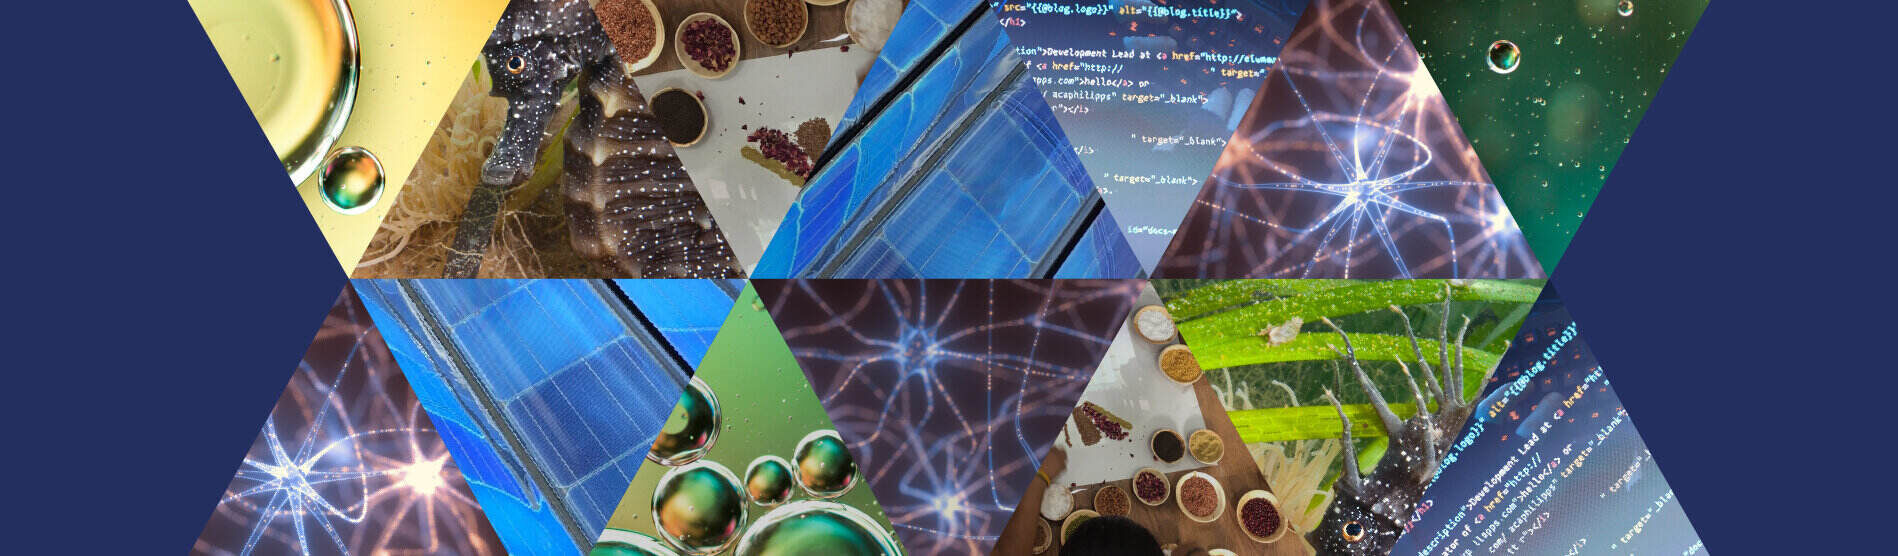 montage of 7 images one representing each research highlight at Swansea Uni Neuron firing, white mask on laptop, solar panel, people with coloured spices in India, oil on water, and underwater seaweed and seahorse